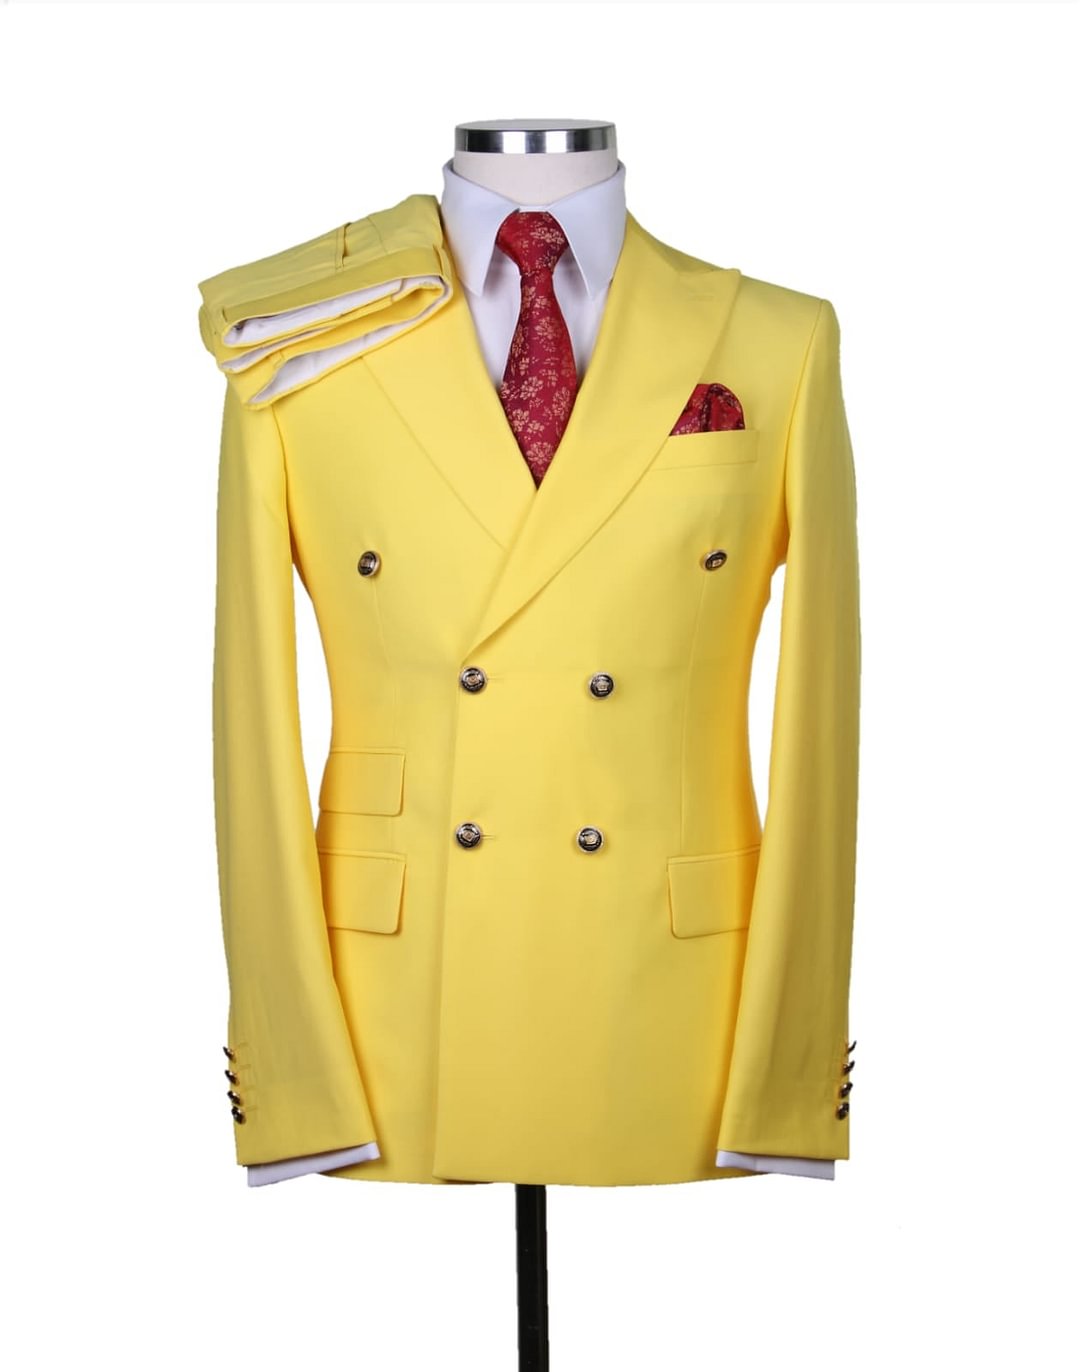 Men's yellow double breasted 2pcs suit.